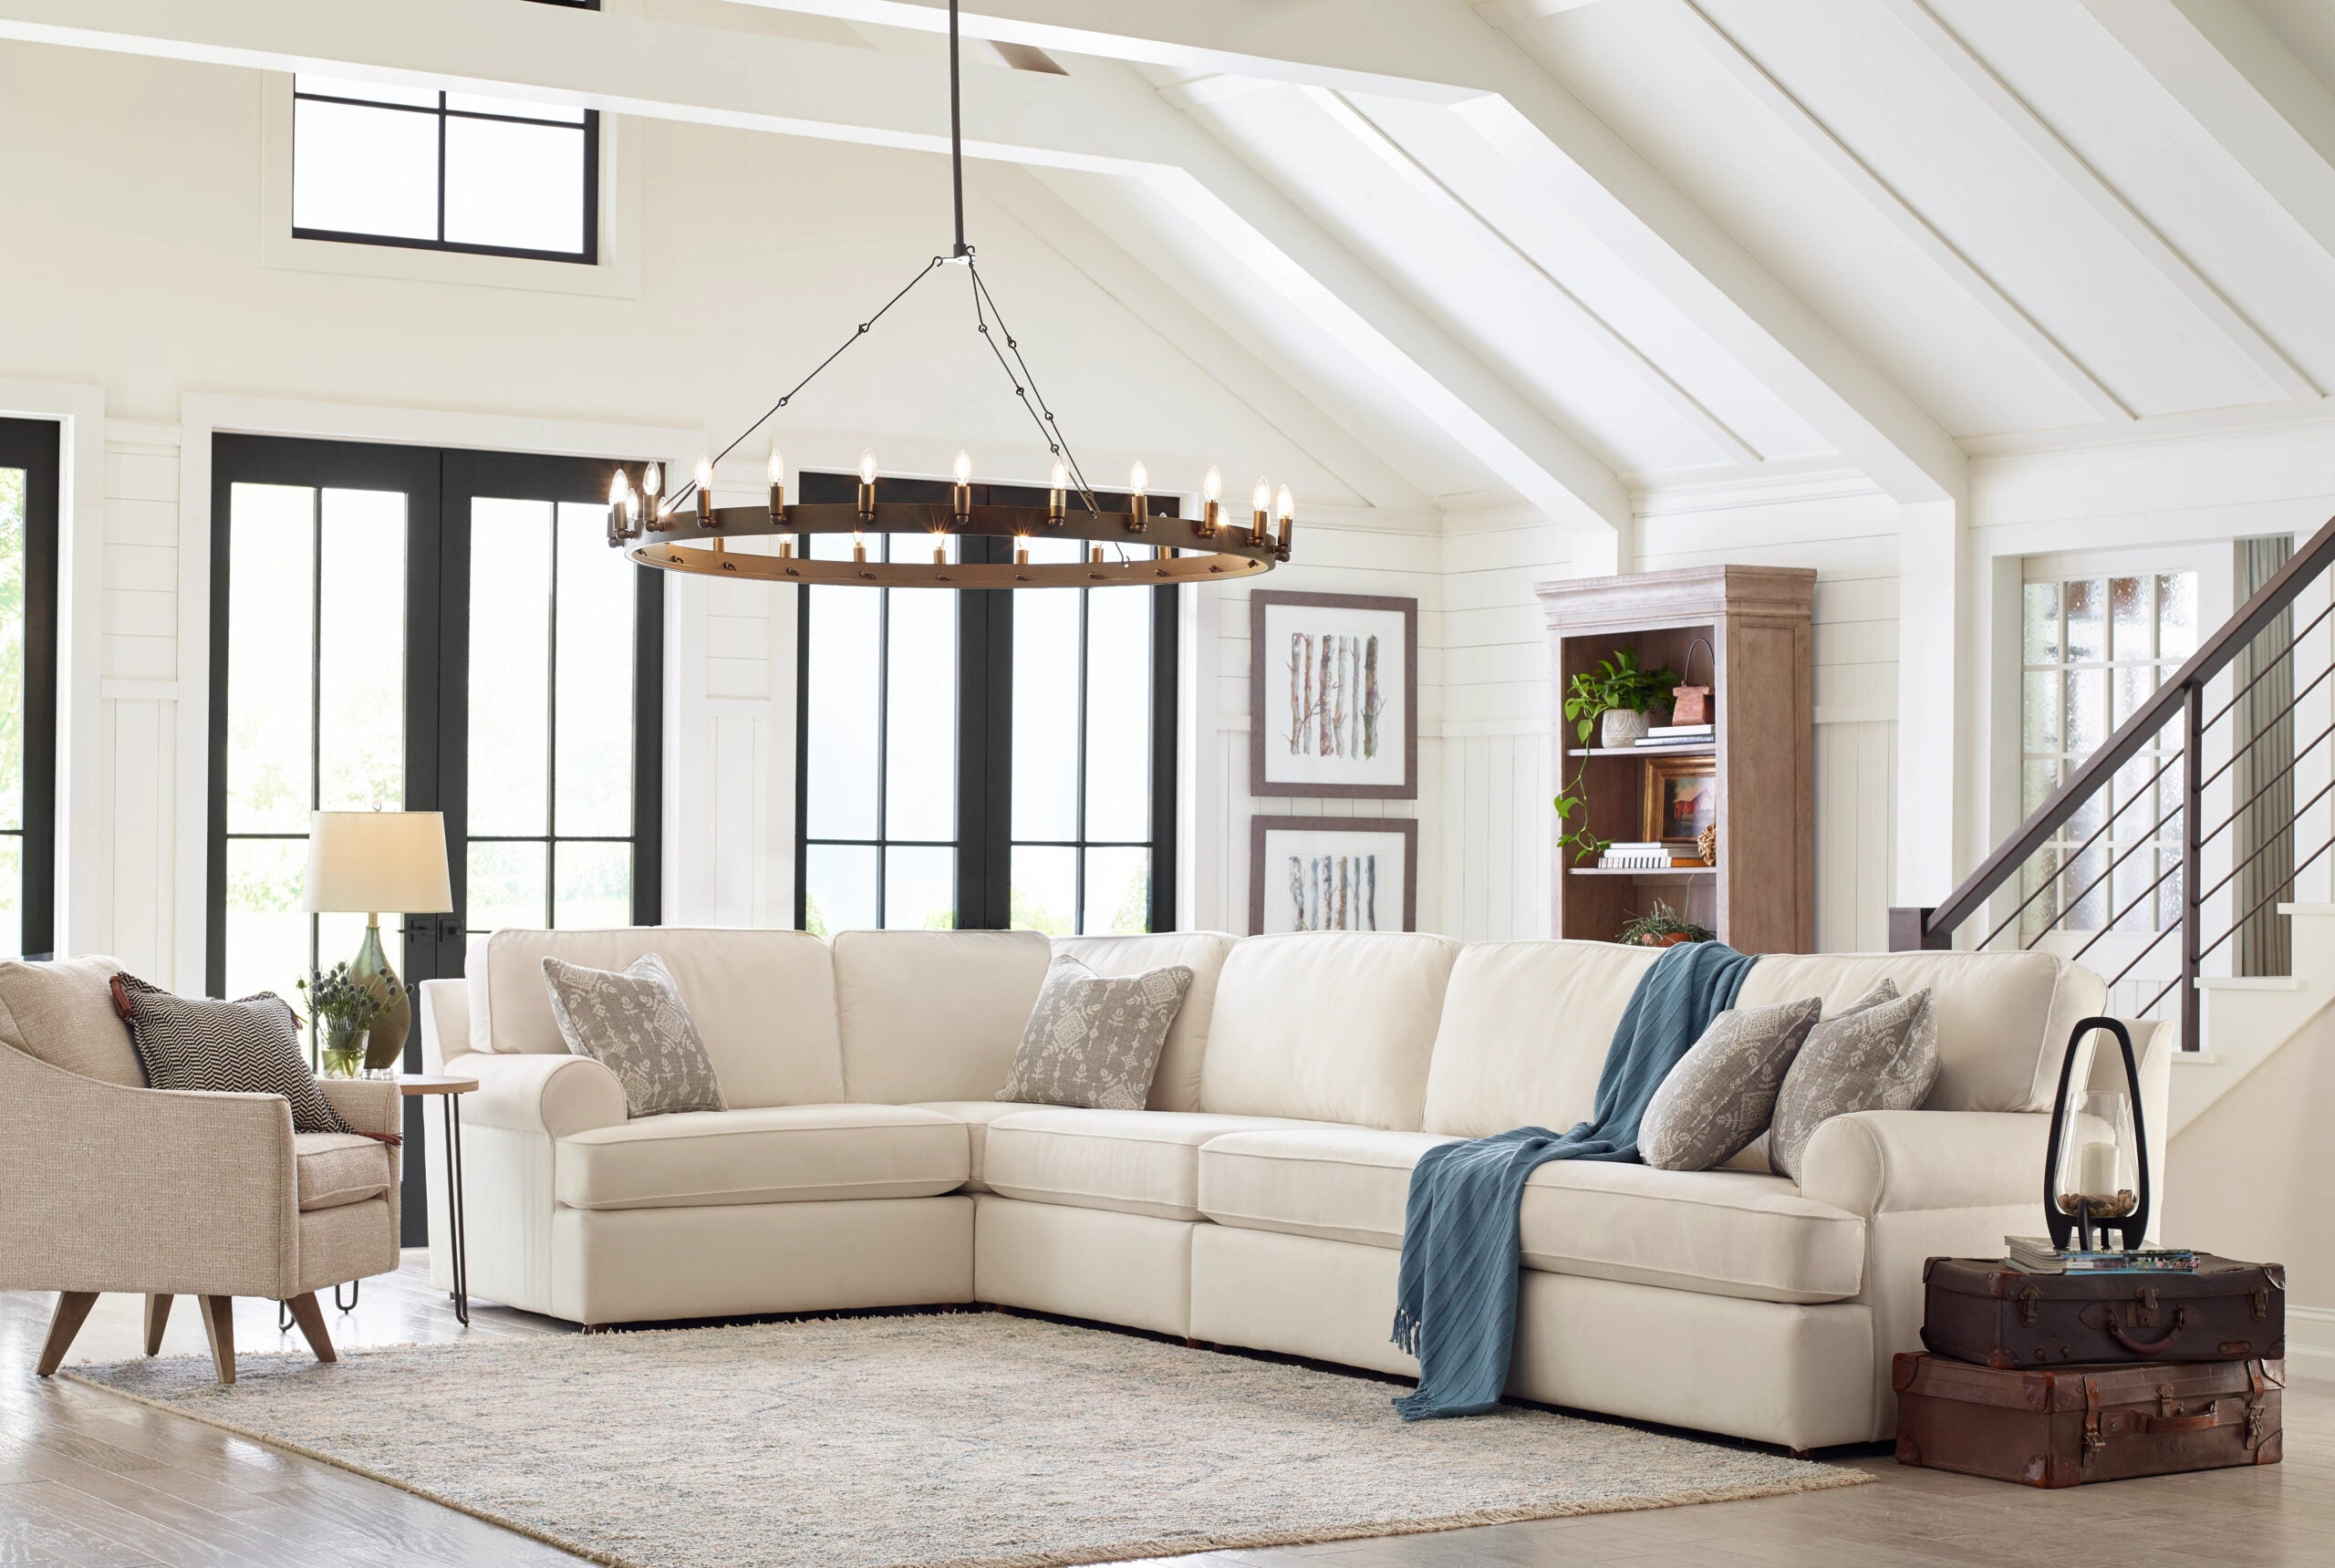 A spacious living room features a large, cream-colored sectional sofa adorned with patterned cushions. A modern chandelier hangs from the high, vaulted ceiling. A cozy armchair sits nearby, and a bookshelf stands against the wall. Light floods through large windows.